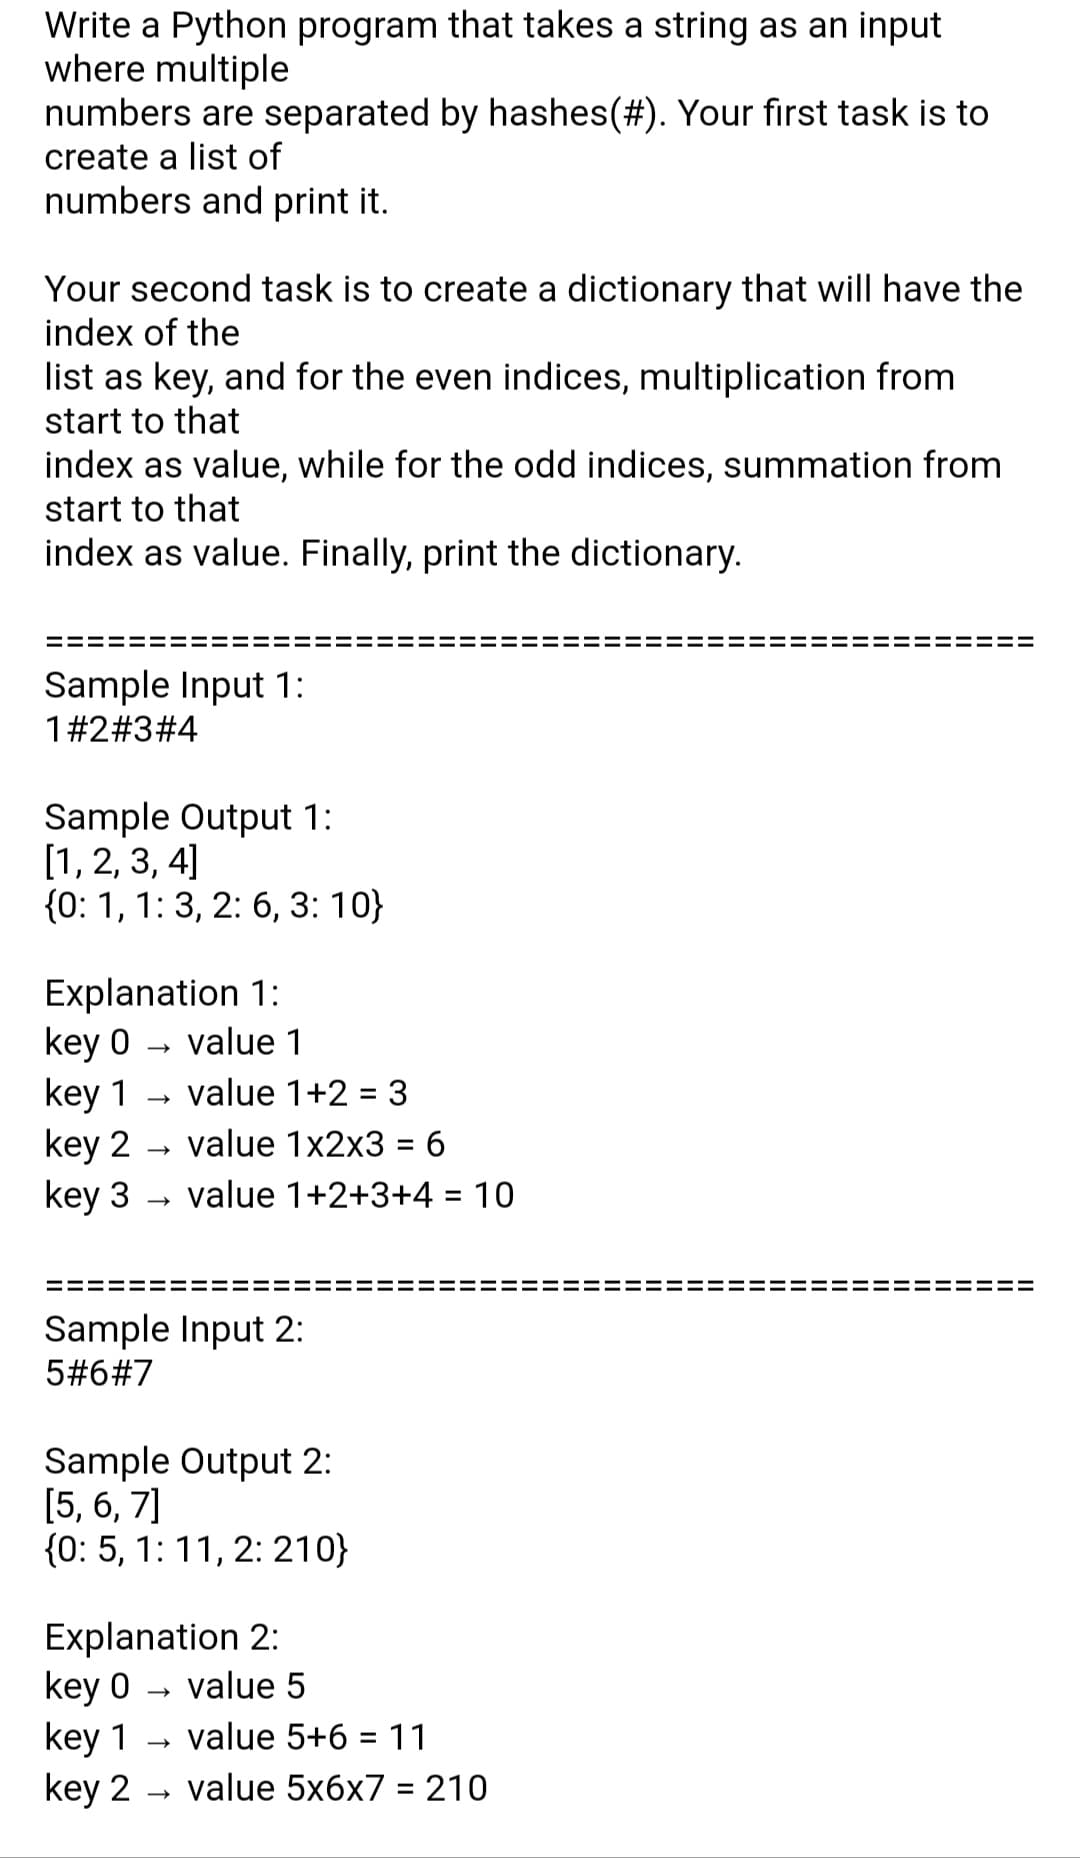 Write a Python program that takes a string as an input
where multiple
numbers are separated by hashes(#). Your first task is to
create a list of
numbers and print it.
Your second task is to create a dictionary that will have the
index of the
list as key, and for the even indices, multiplication from
start to that
index as value, while for the odd indices, summation from
start to that
index as value. Finally, print the dictionary.
Sample Input 1:
1#2#3#4
Sample Output 1:
[1, 2, 3, 4]
{0: 1, 1: 3, 2: 6, 3: 10}
Explanation 1:
key 0
key 1
key 2
key 3
value 1
value 1+2 = 3
value 1x2x3 = 6
value 1+2+3+4 = 10
Sample Input 2:
5#6#7
Sample Output 2:
[5, 6, 7]
{0: 5, 1: 11, 2: 210}
Explanation 2:
key 0 – value 5
key 1
key 2 - value 5x6x7 = 210
value 5+6 = 11
II
II
II
II
II
II
II
II
II
II
II
II
II
II
II
